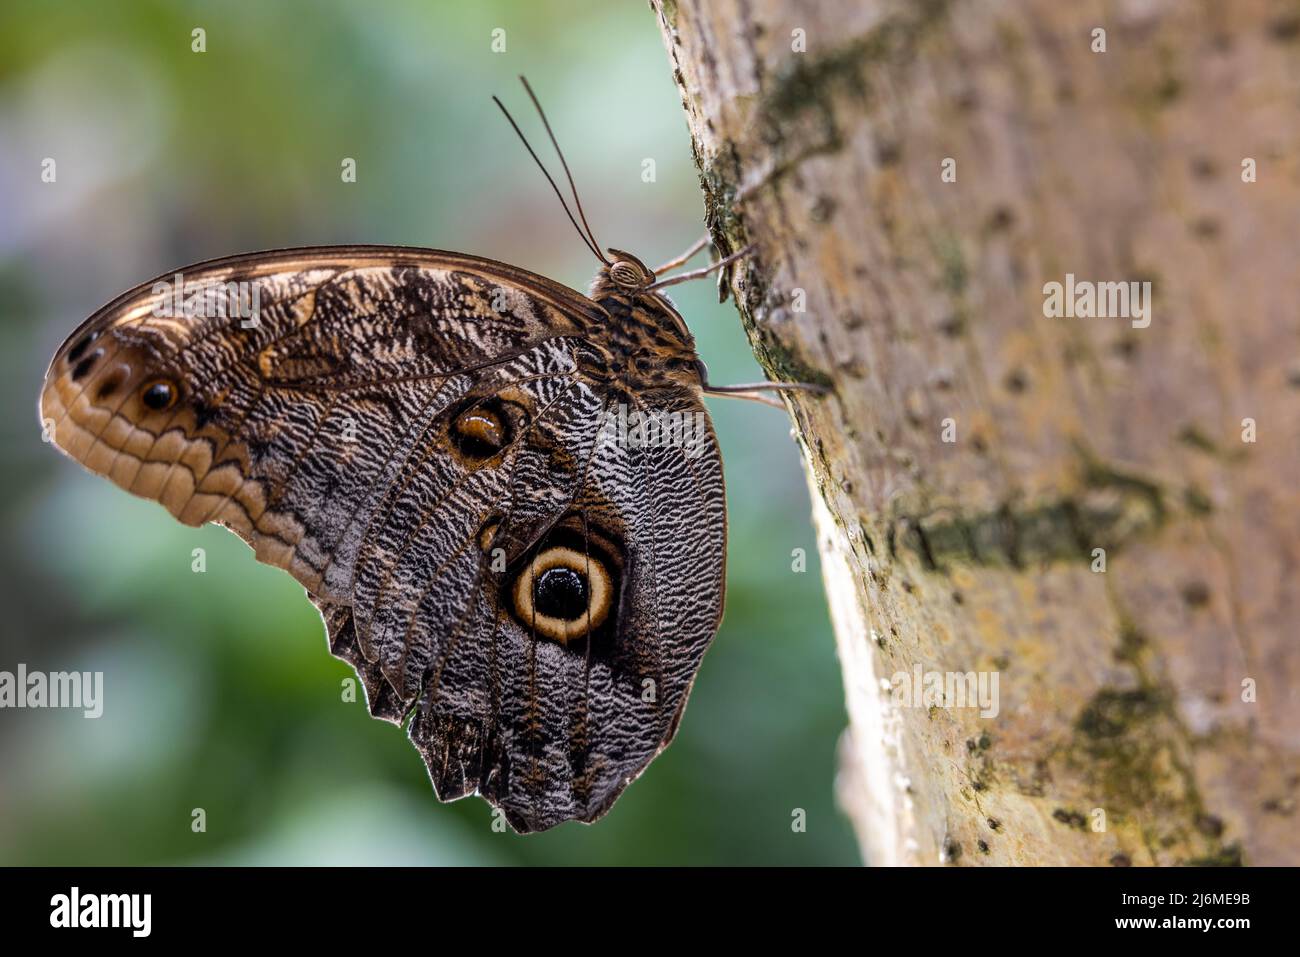 Closeup of the side of an Owl butterfly perched on a tree trunk Stock Photo